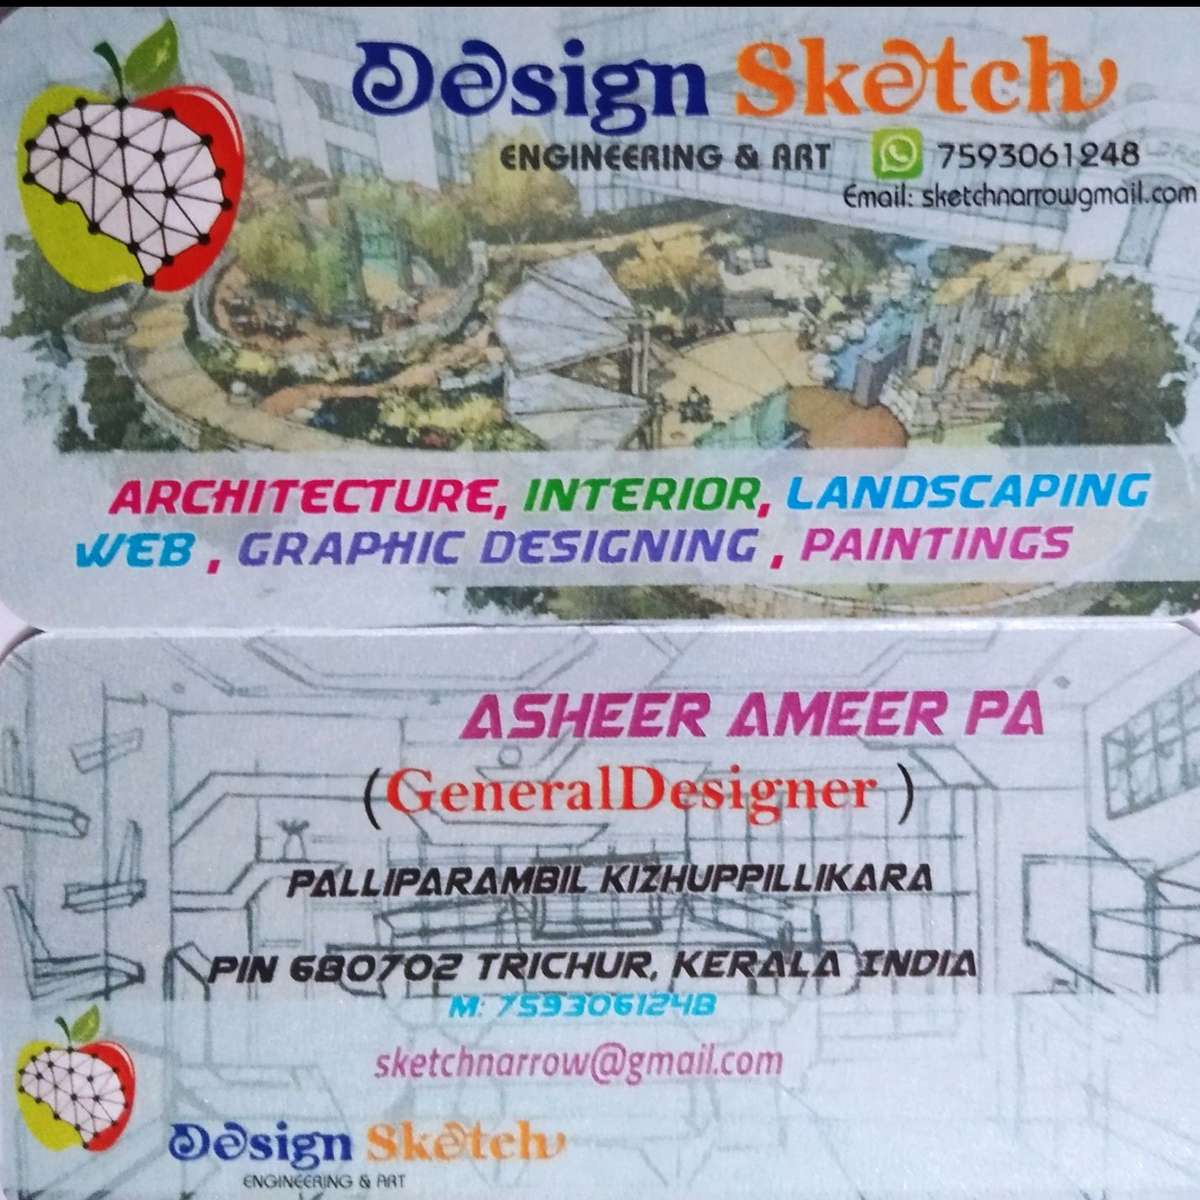 hi i am Asheer, designer
can we work together, can i get any projects to deign or handling.